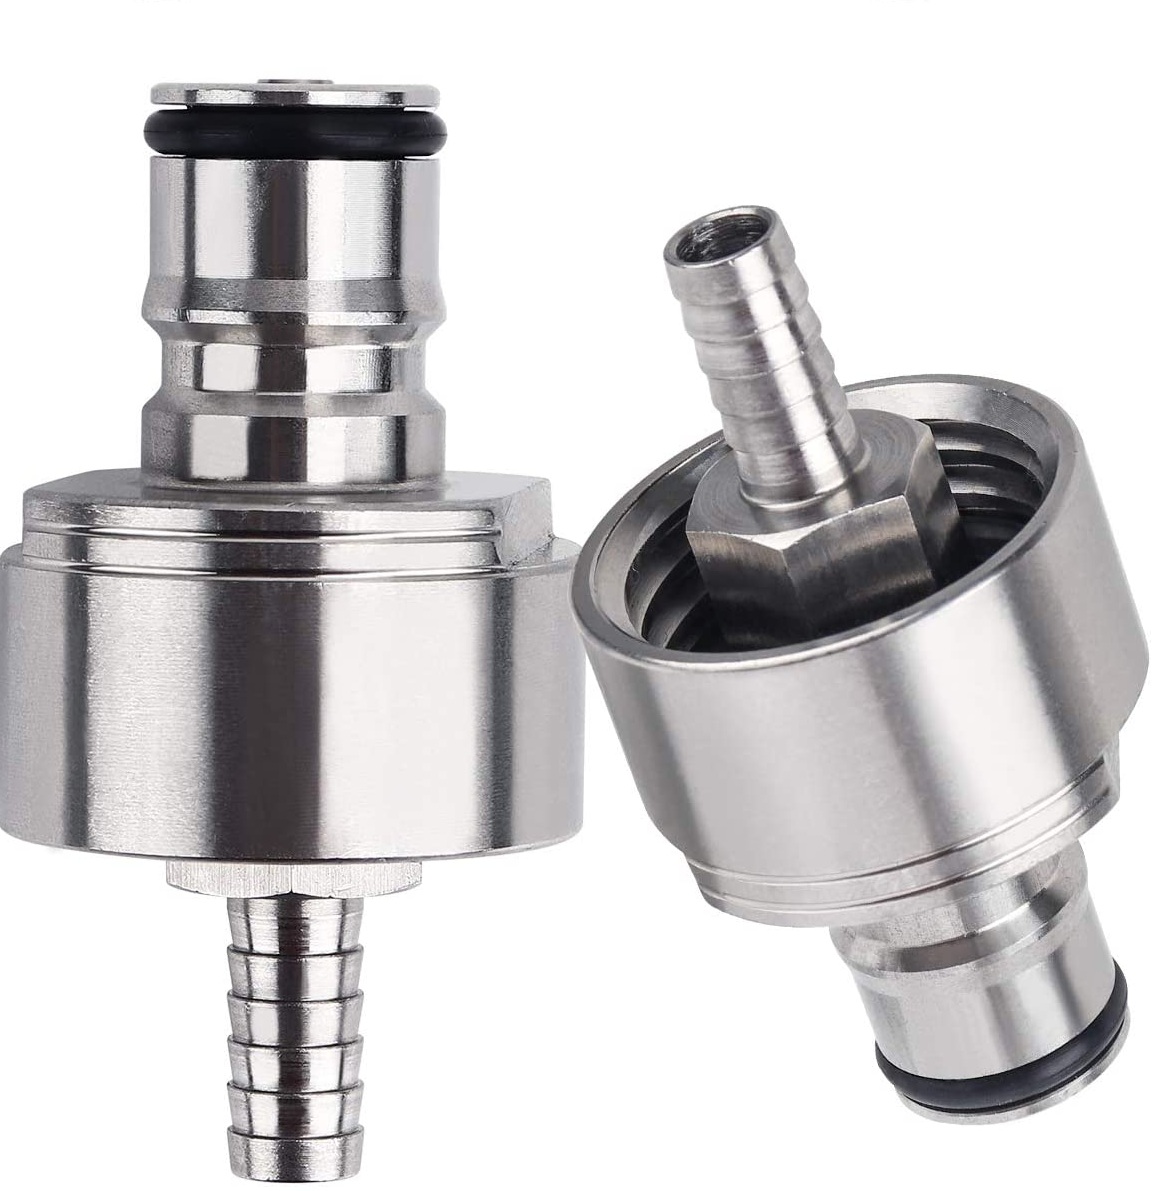 Stainless Steel Carbonation Cap Tee Connected with Bottle and Carbonation Cap 